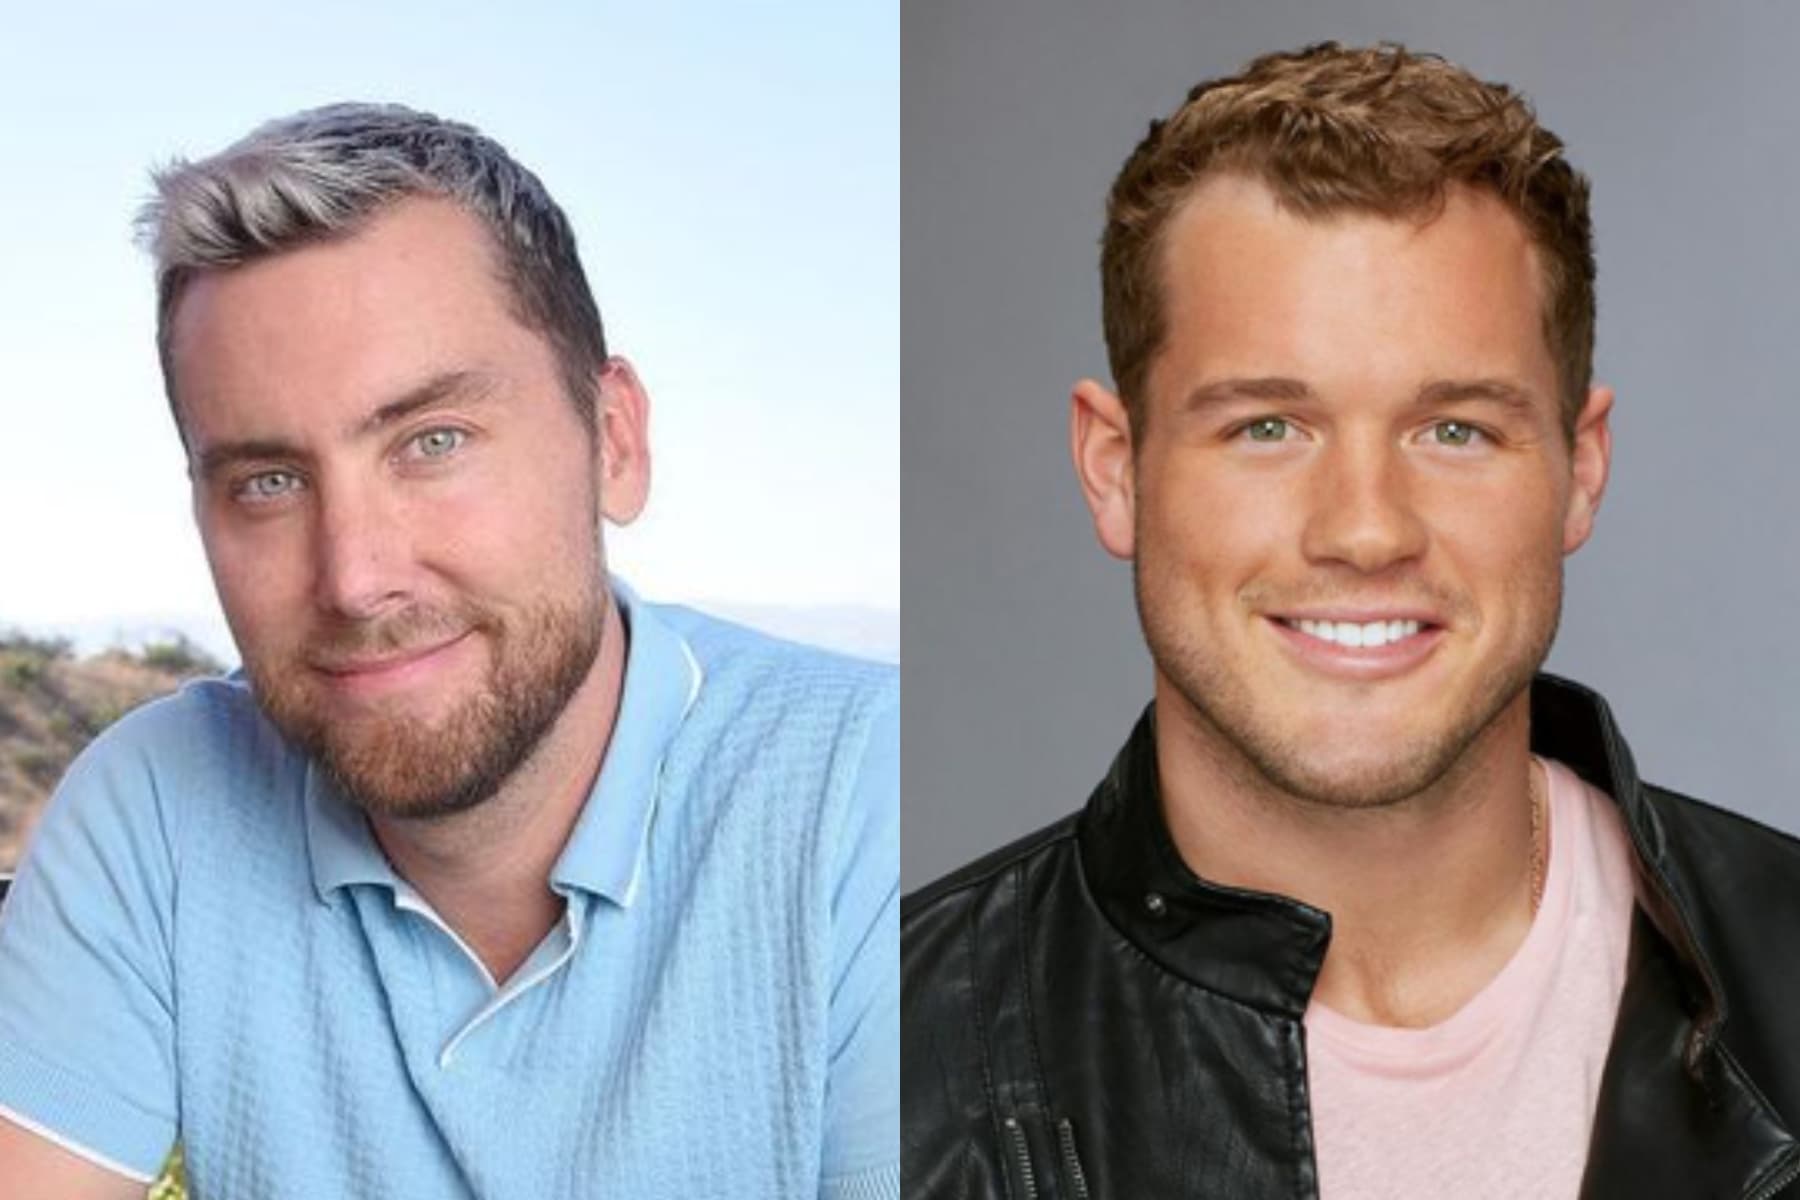 Lance Bass says Colton Underwood is “monetizing” his coming out experience